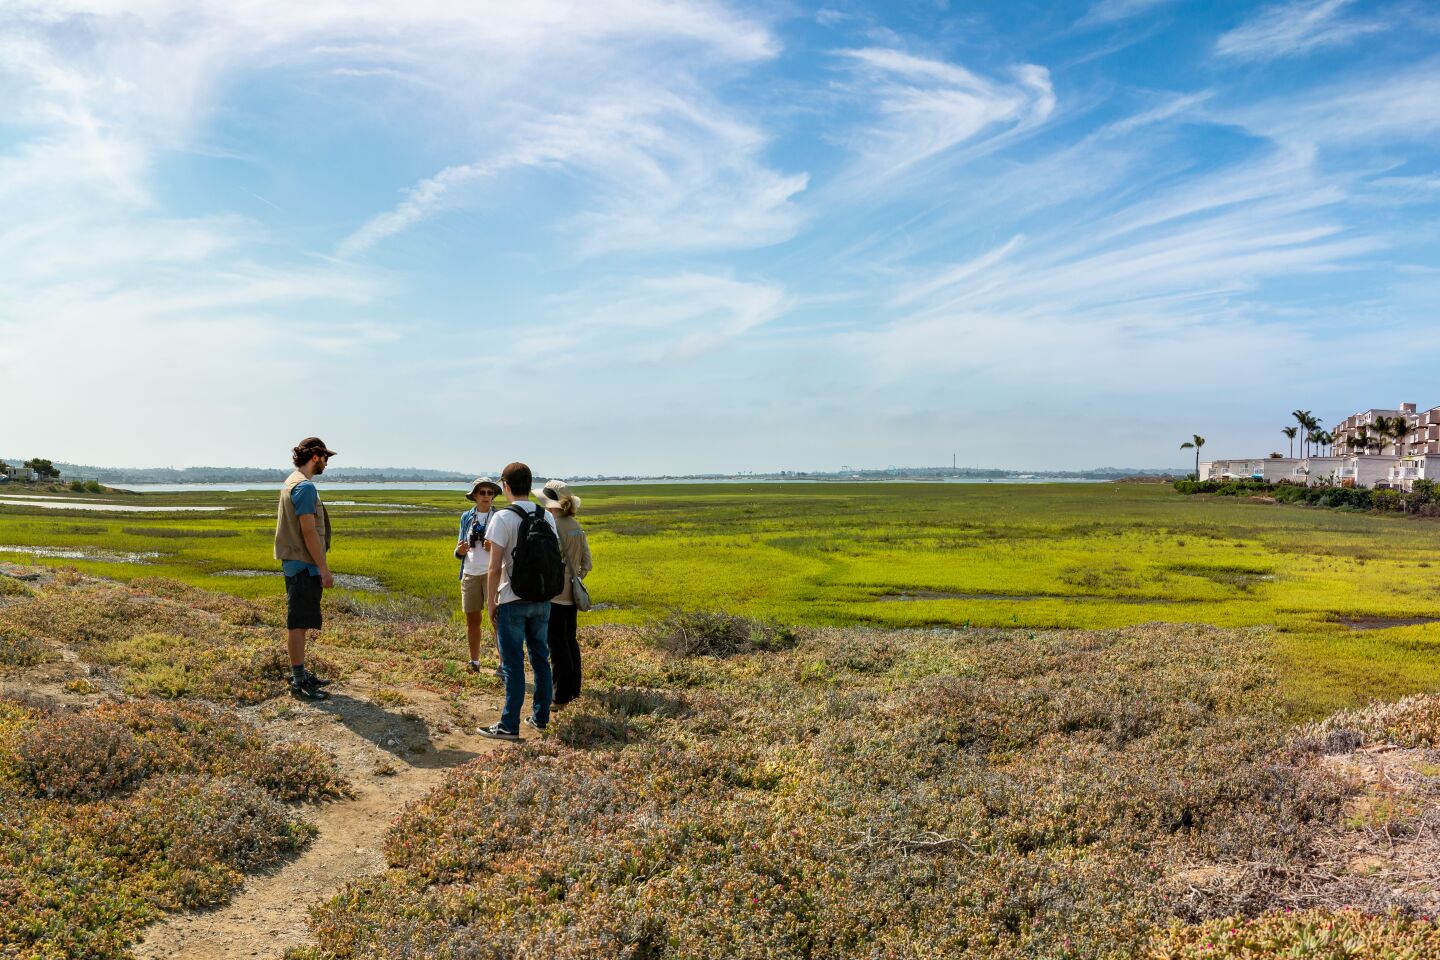 Visitors could explore the Kendal-Frost Bay Marsh Reserve during the first Wander the Wetlands event on July 24.